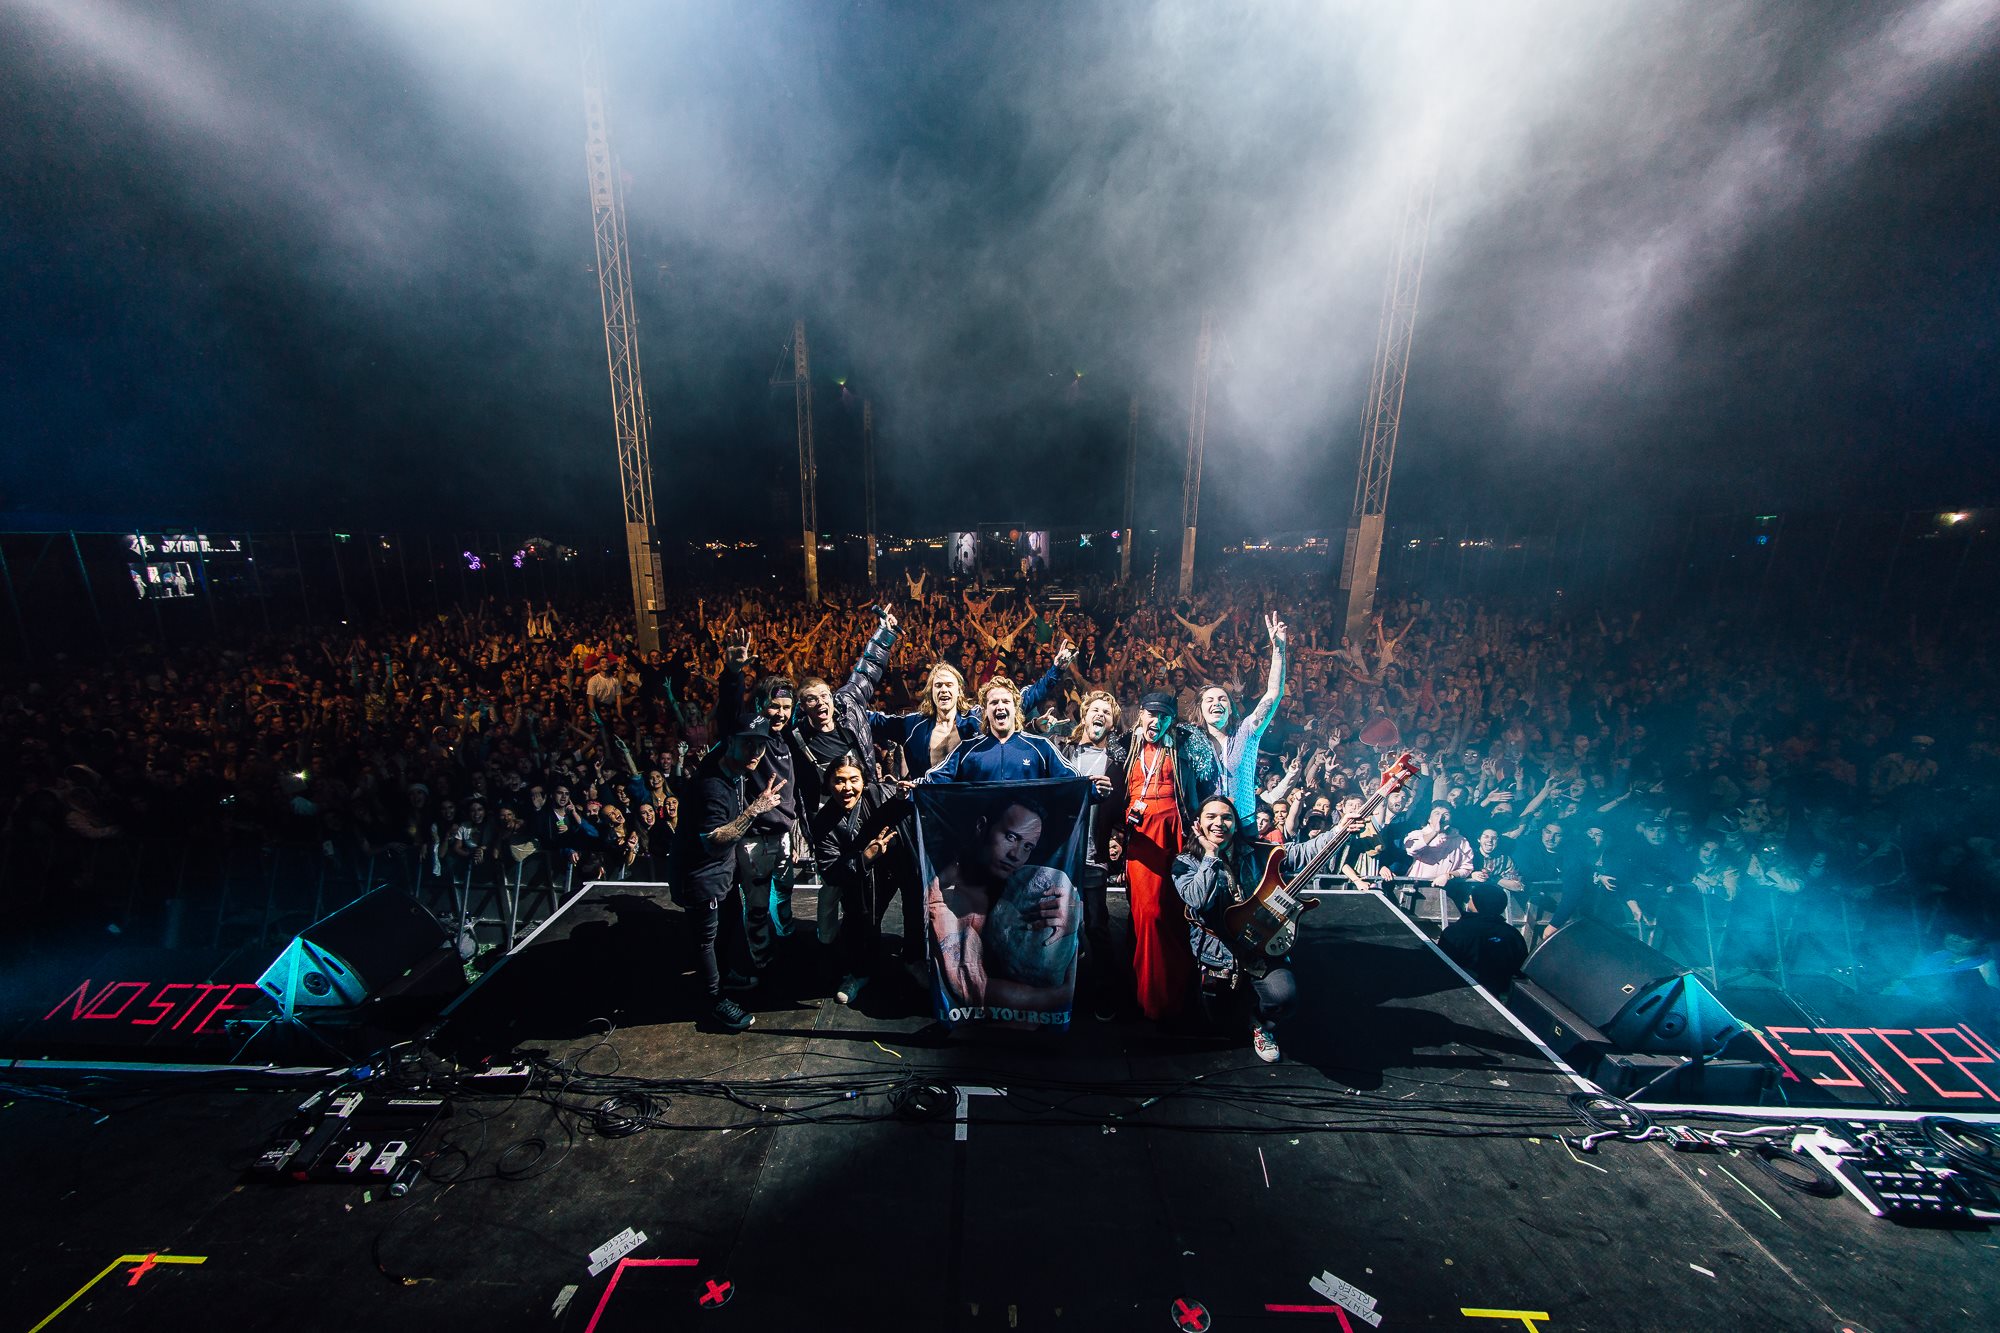 EXCLUSIVE: How Carmada pulled off the impossible for ‘EDM The Musical’ set at Splendour [Long Read]